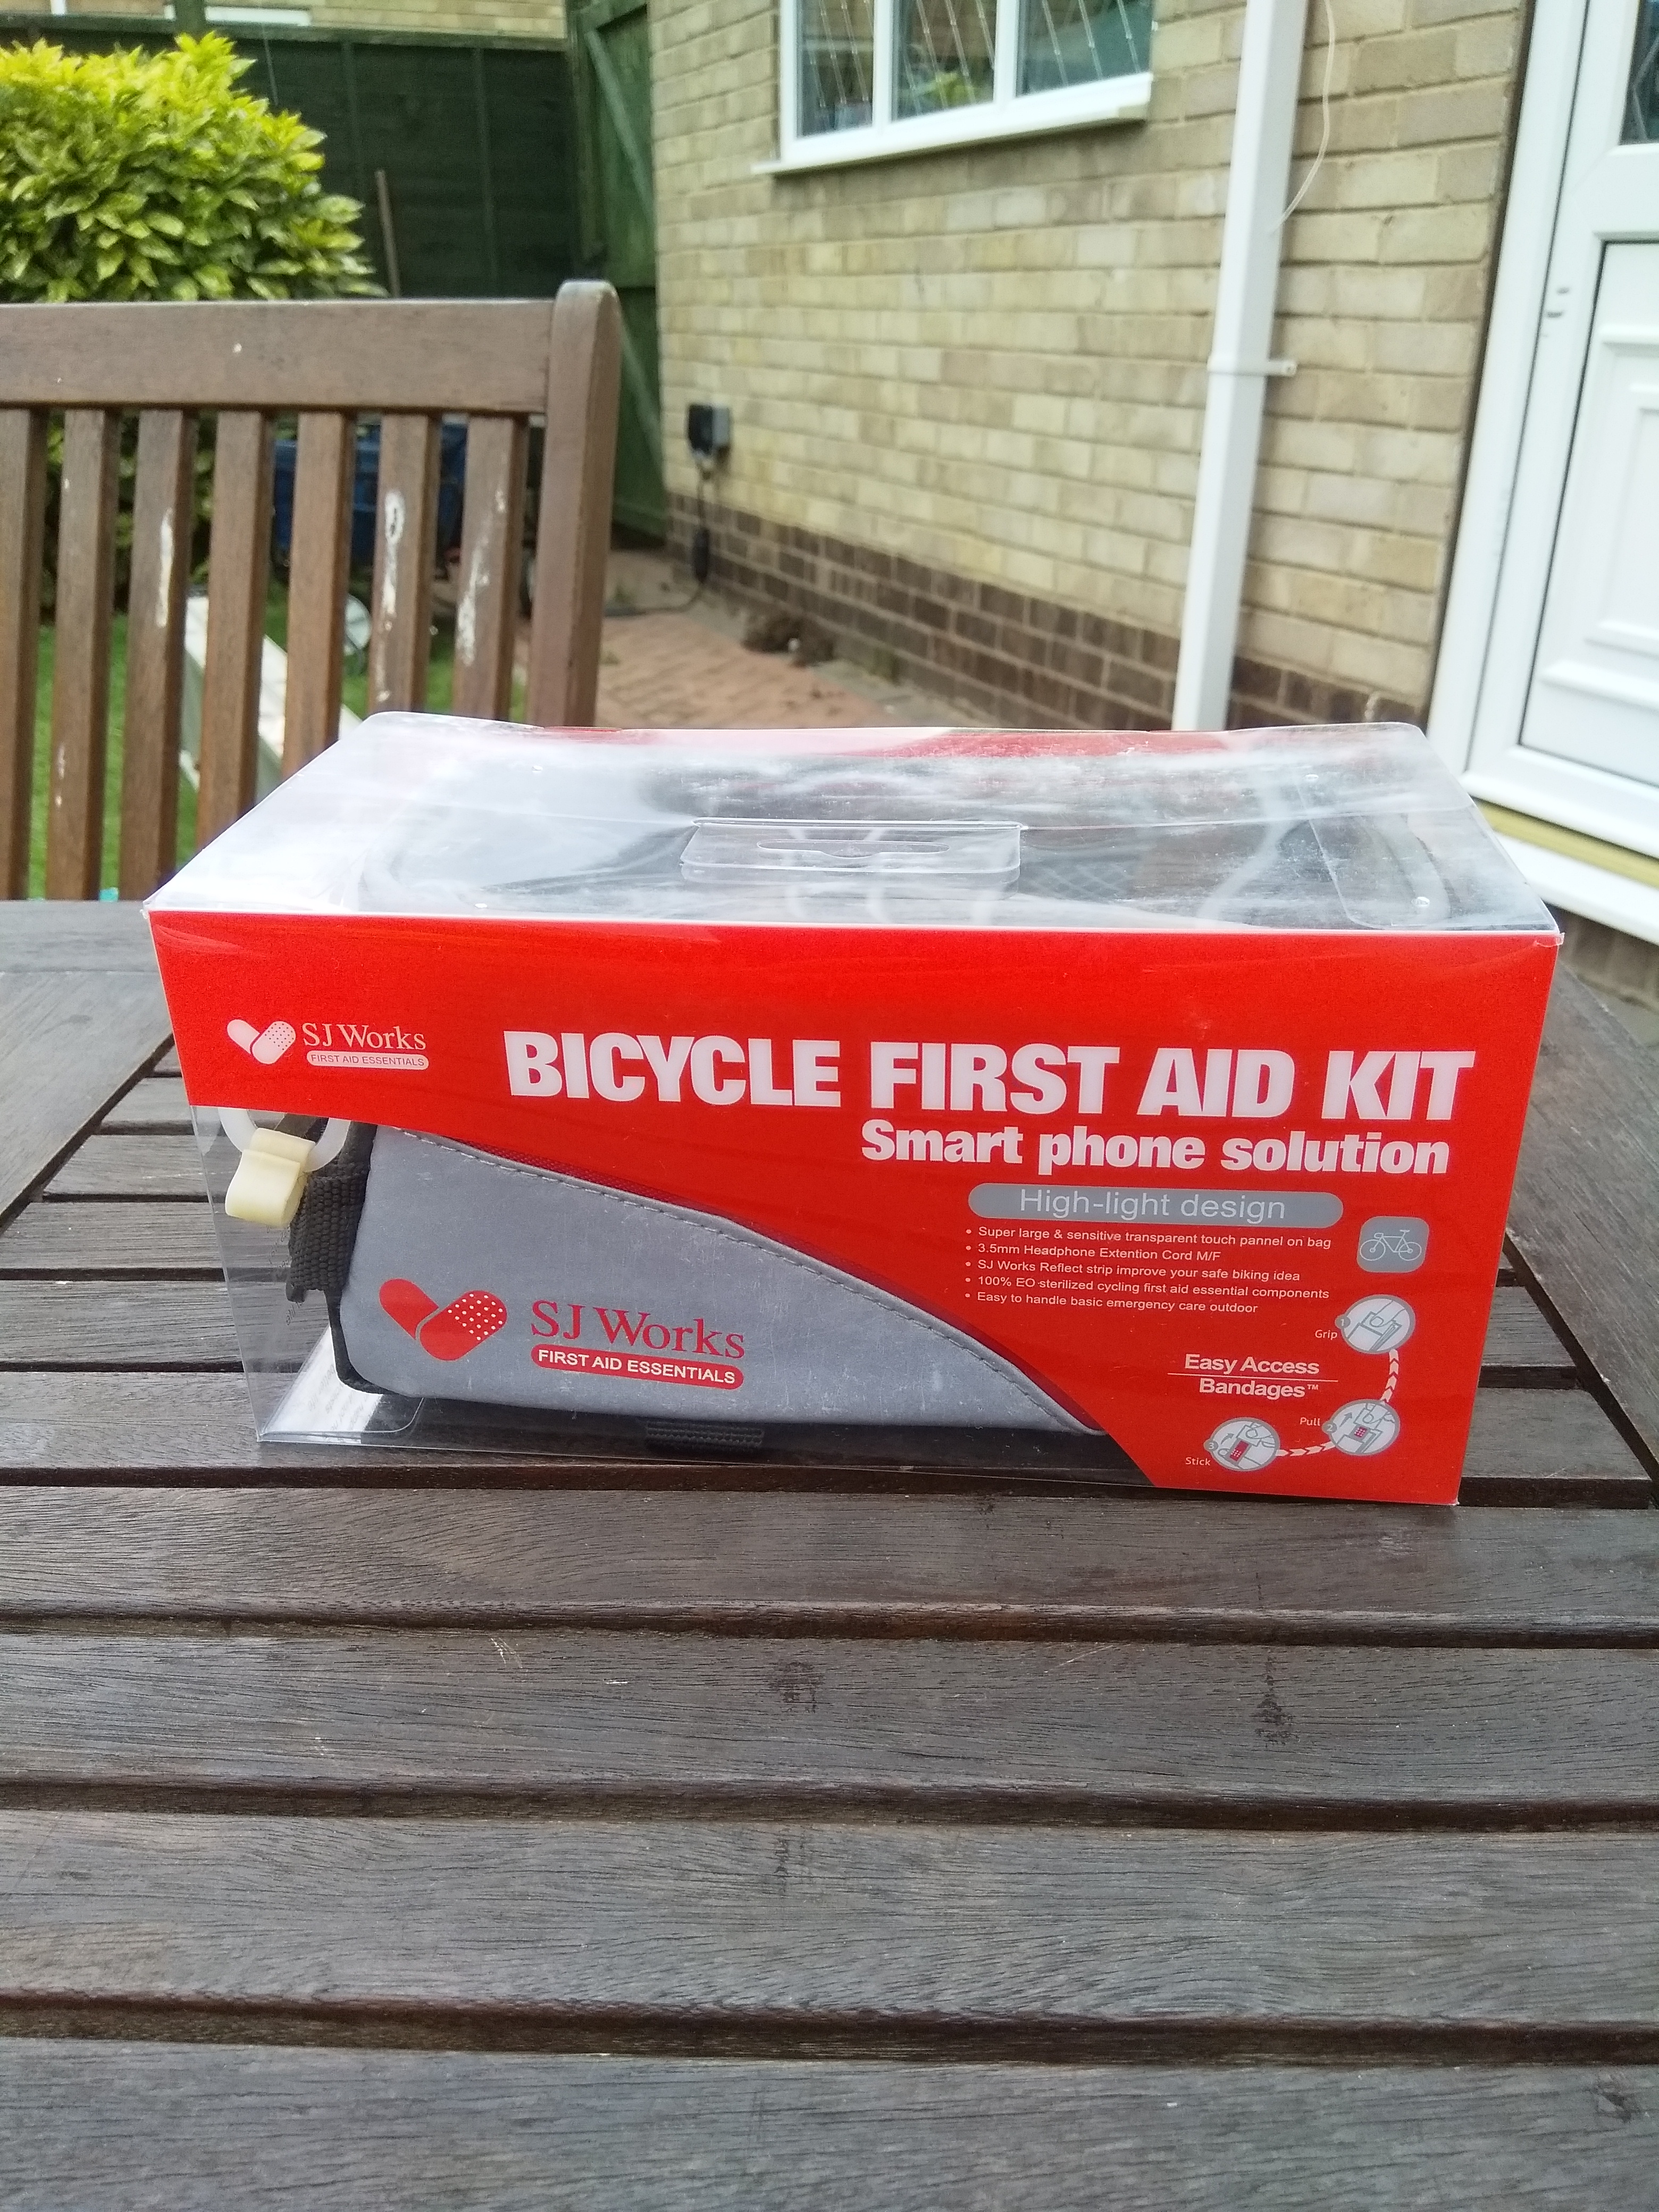 Smart Phone Solution Bicycle First Aid Kit